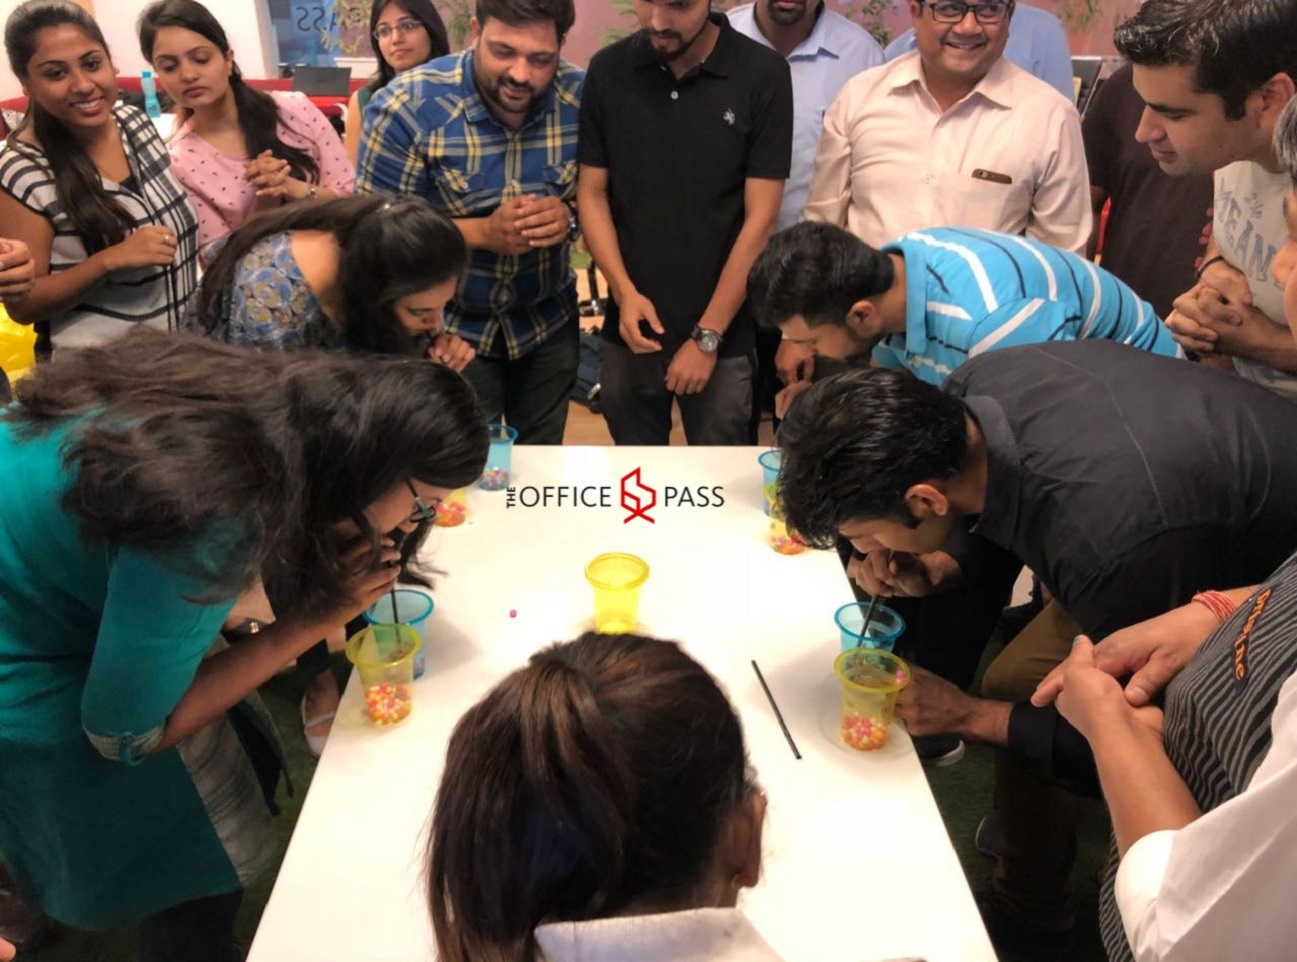 Community event at The Office Pass, Gurgaon